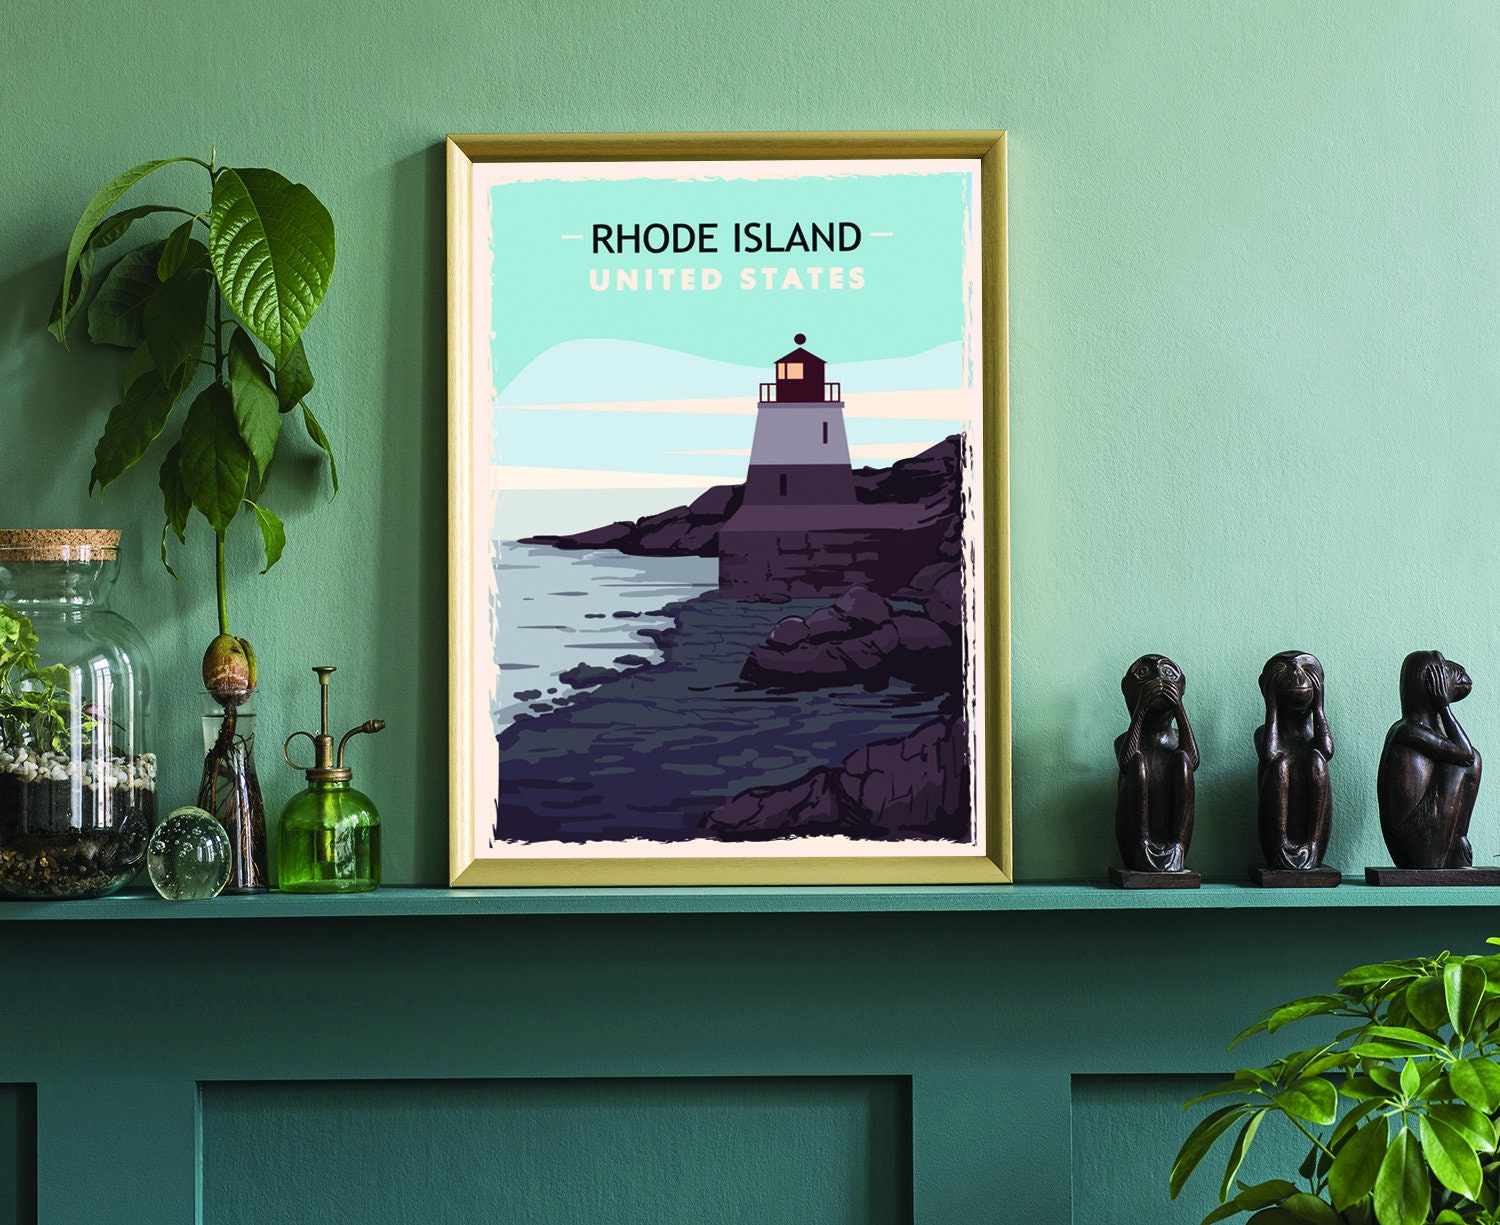 Retro Style Travel Poster, Rhode Island Vintage Rustic Poster Print, Home Wall Art, Office Wall Decor, Rhode Island, State Map Poster